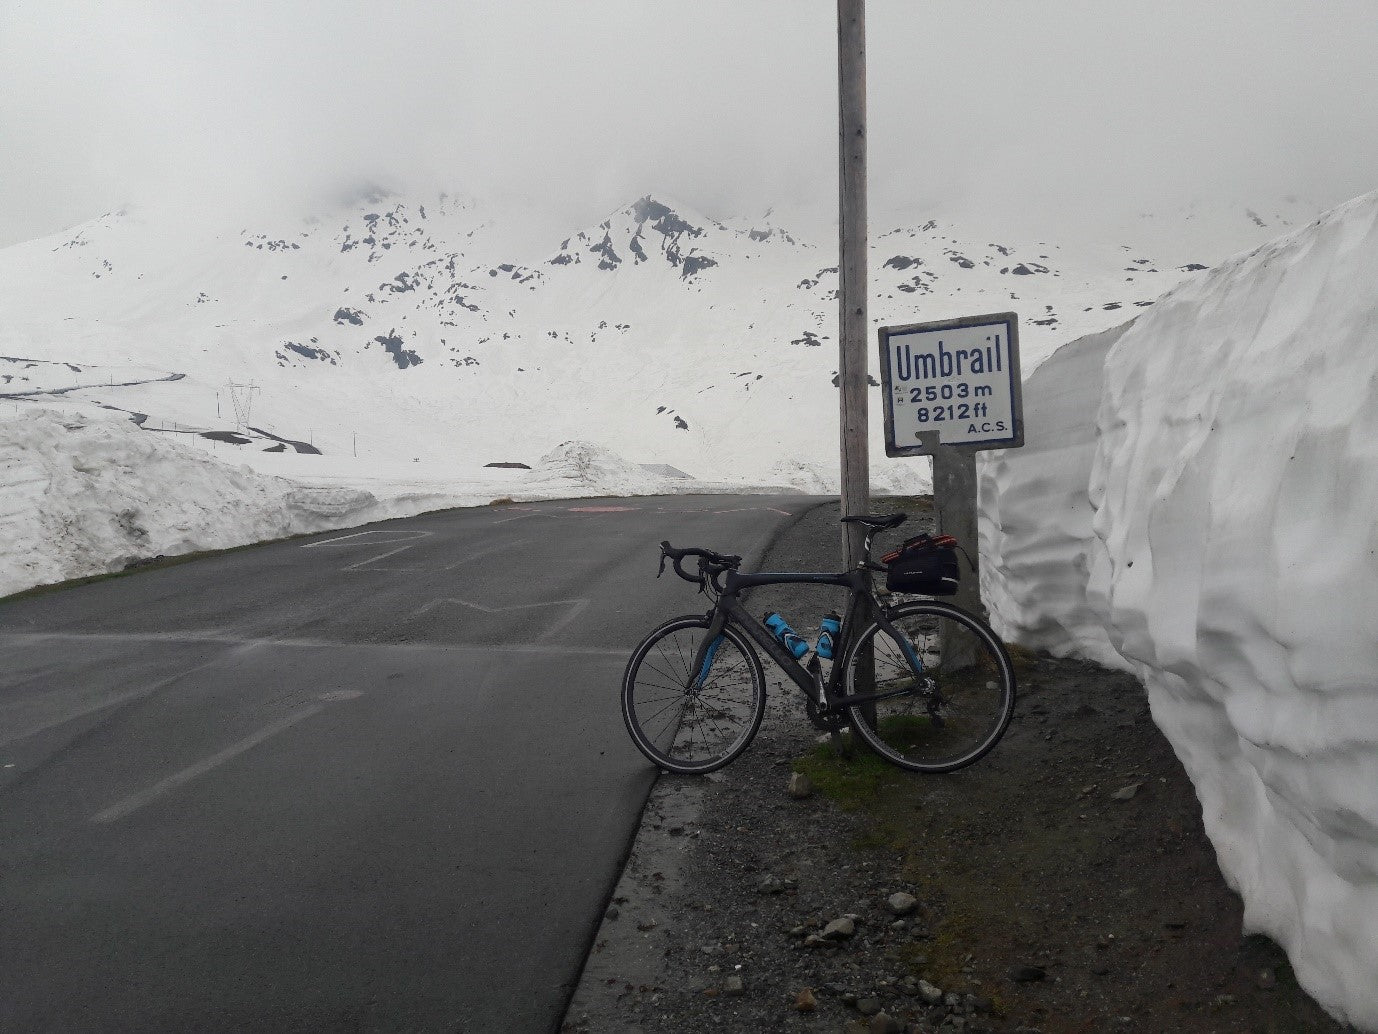 The top of the Umbrail pass. Note the road to the Stelvio summit on the left.